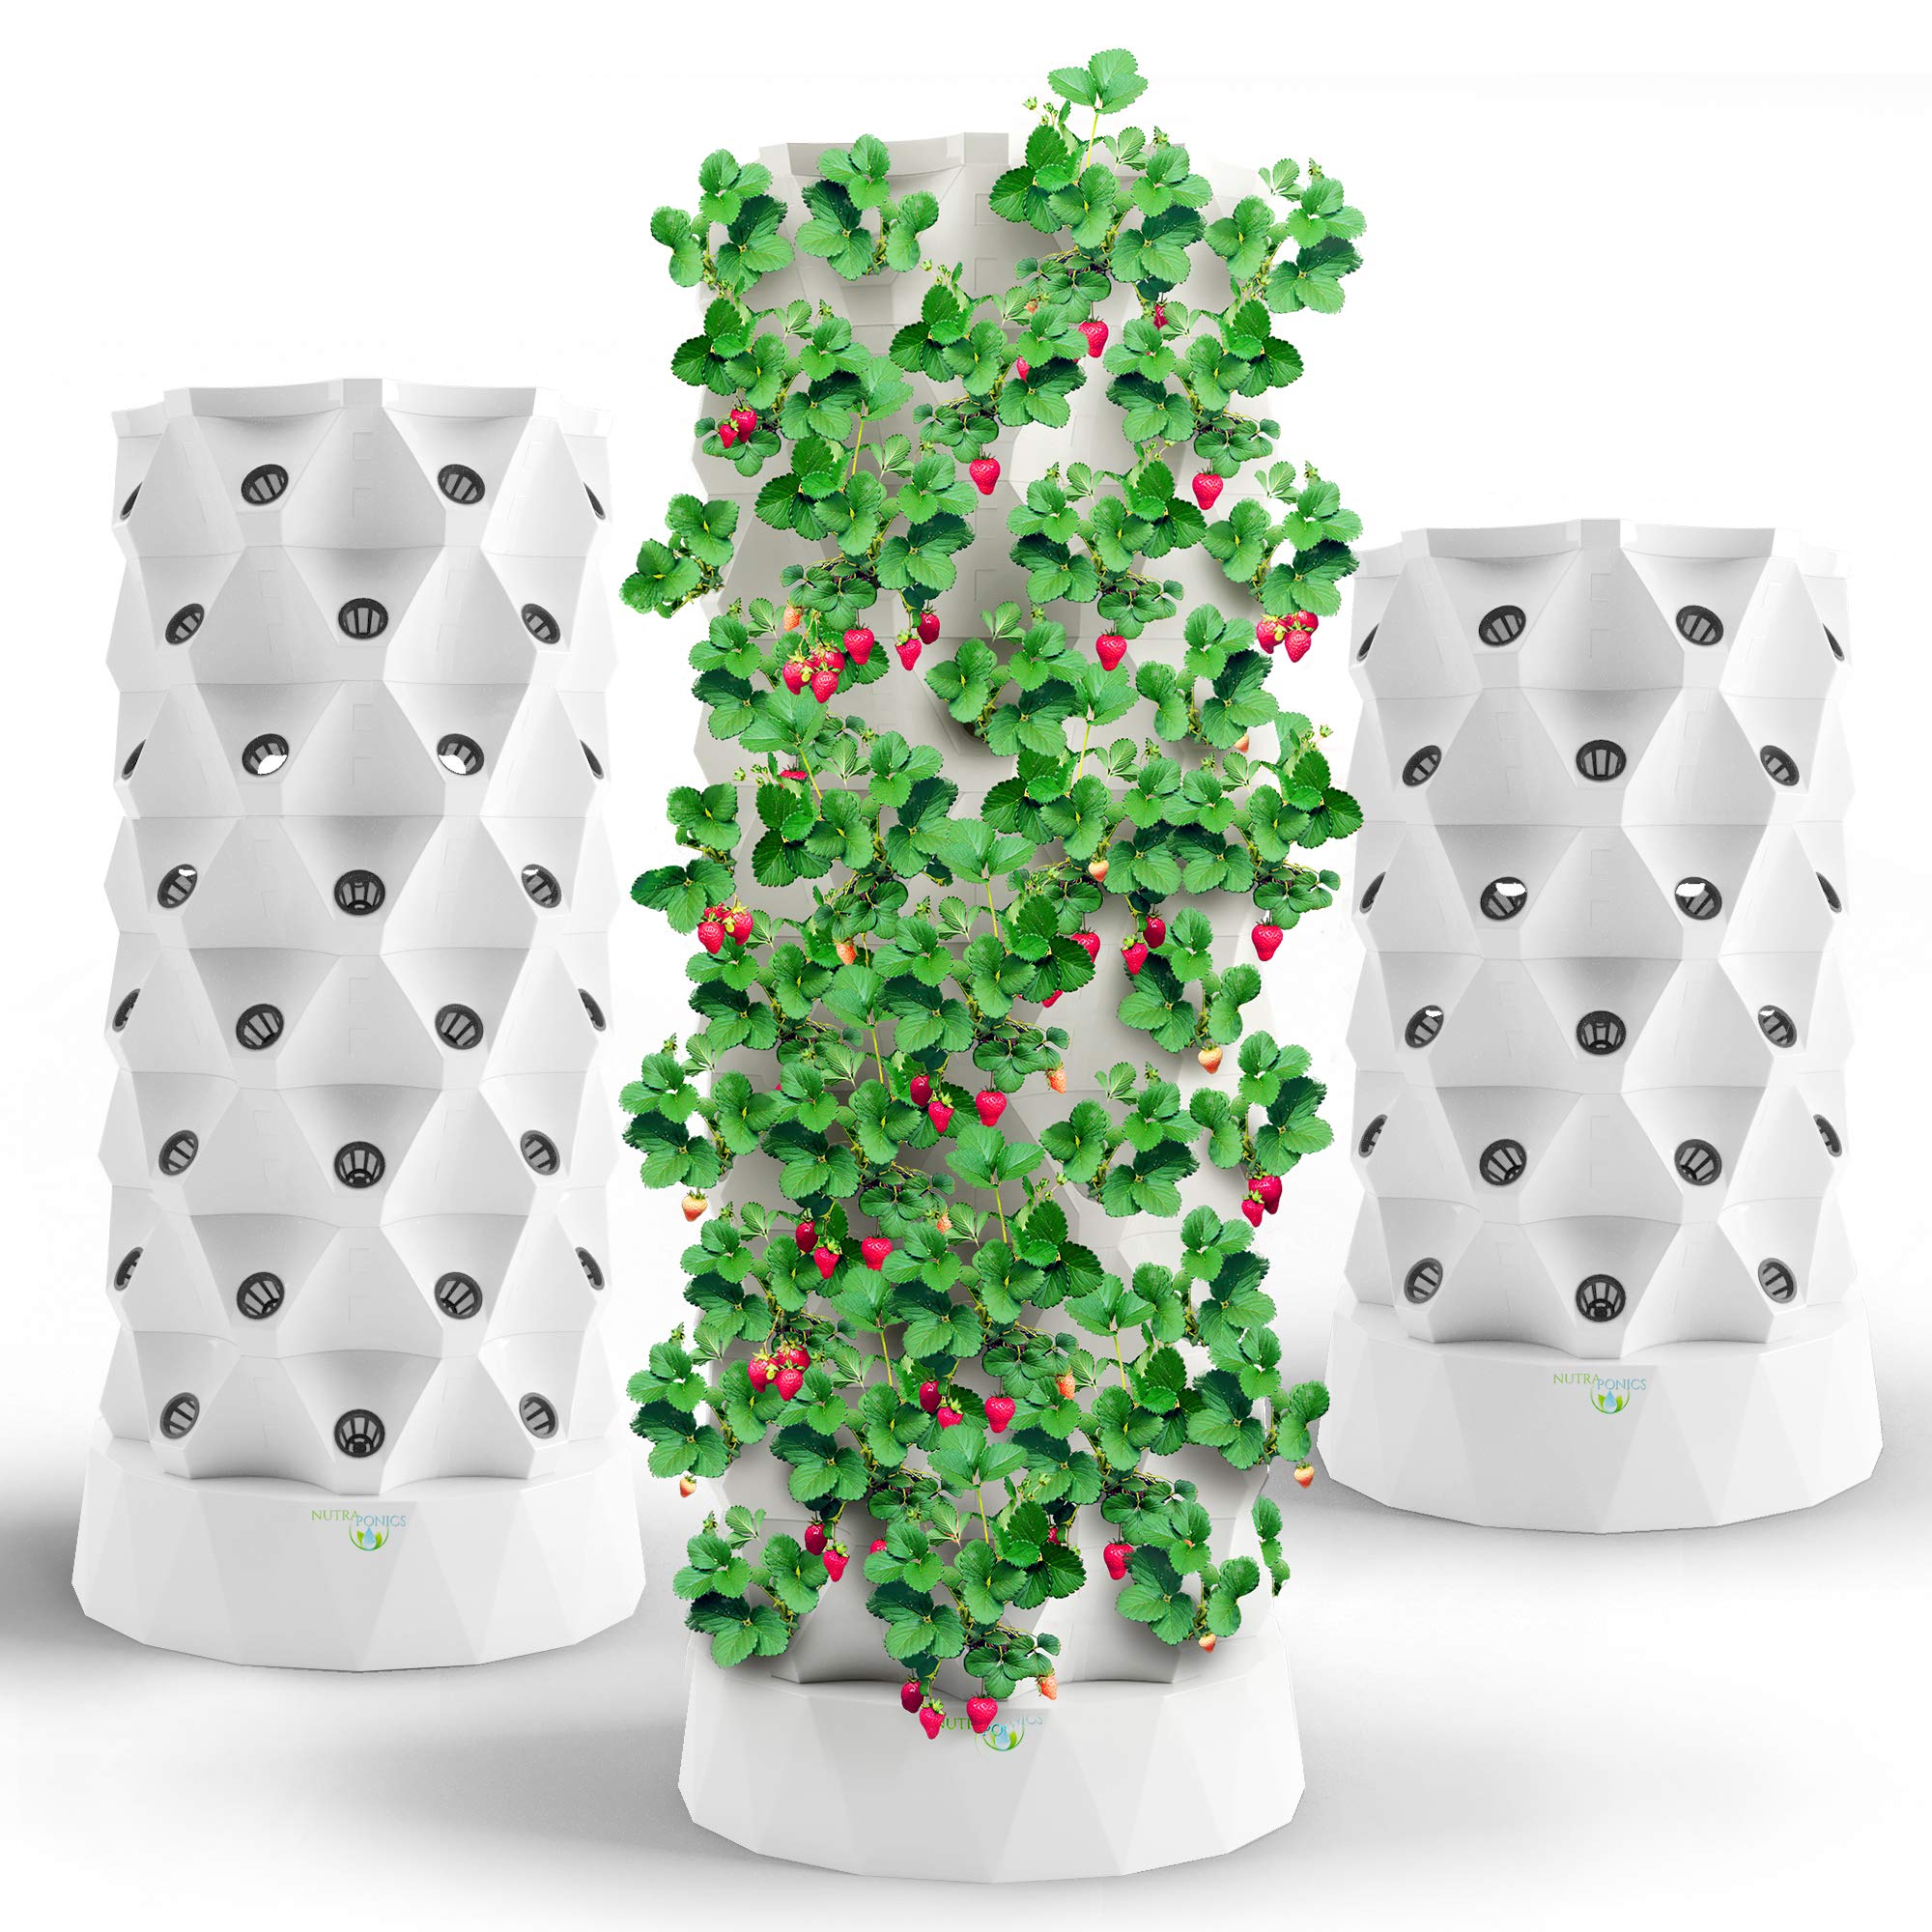 Achieve remarkable results in your garden with Aeroponic Tower Gardening. Learn how to overcome challenges and optimize plant growth for the ultimate harvest.